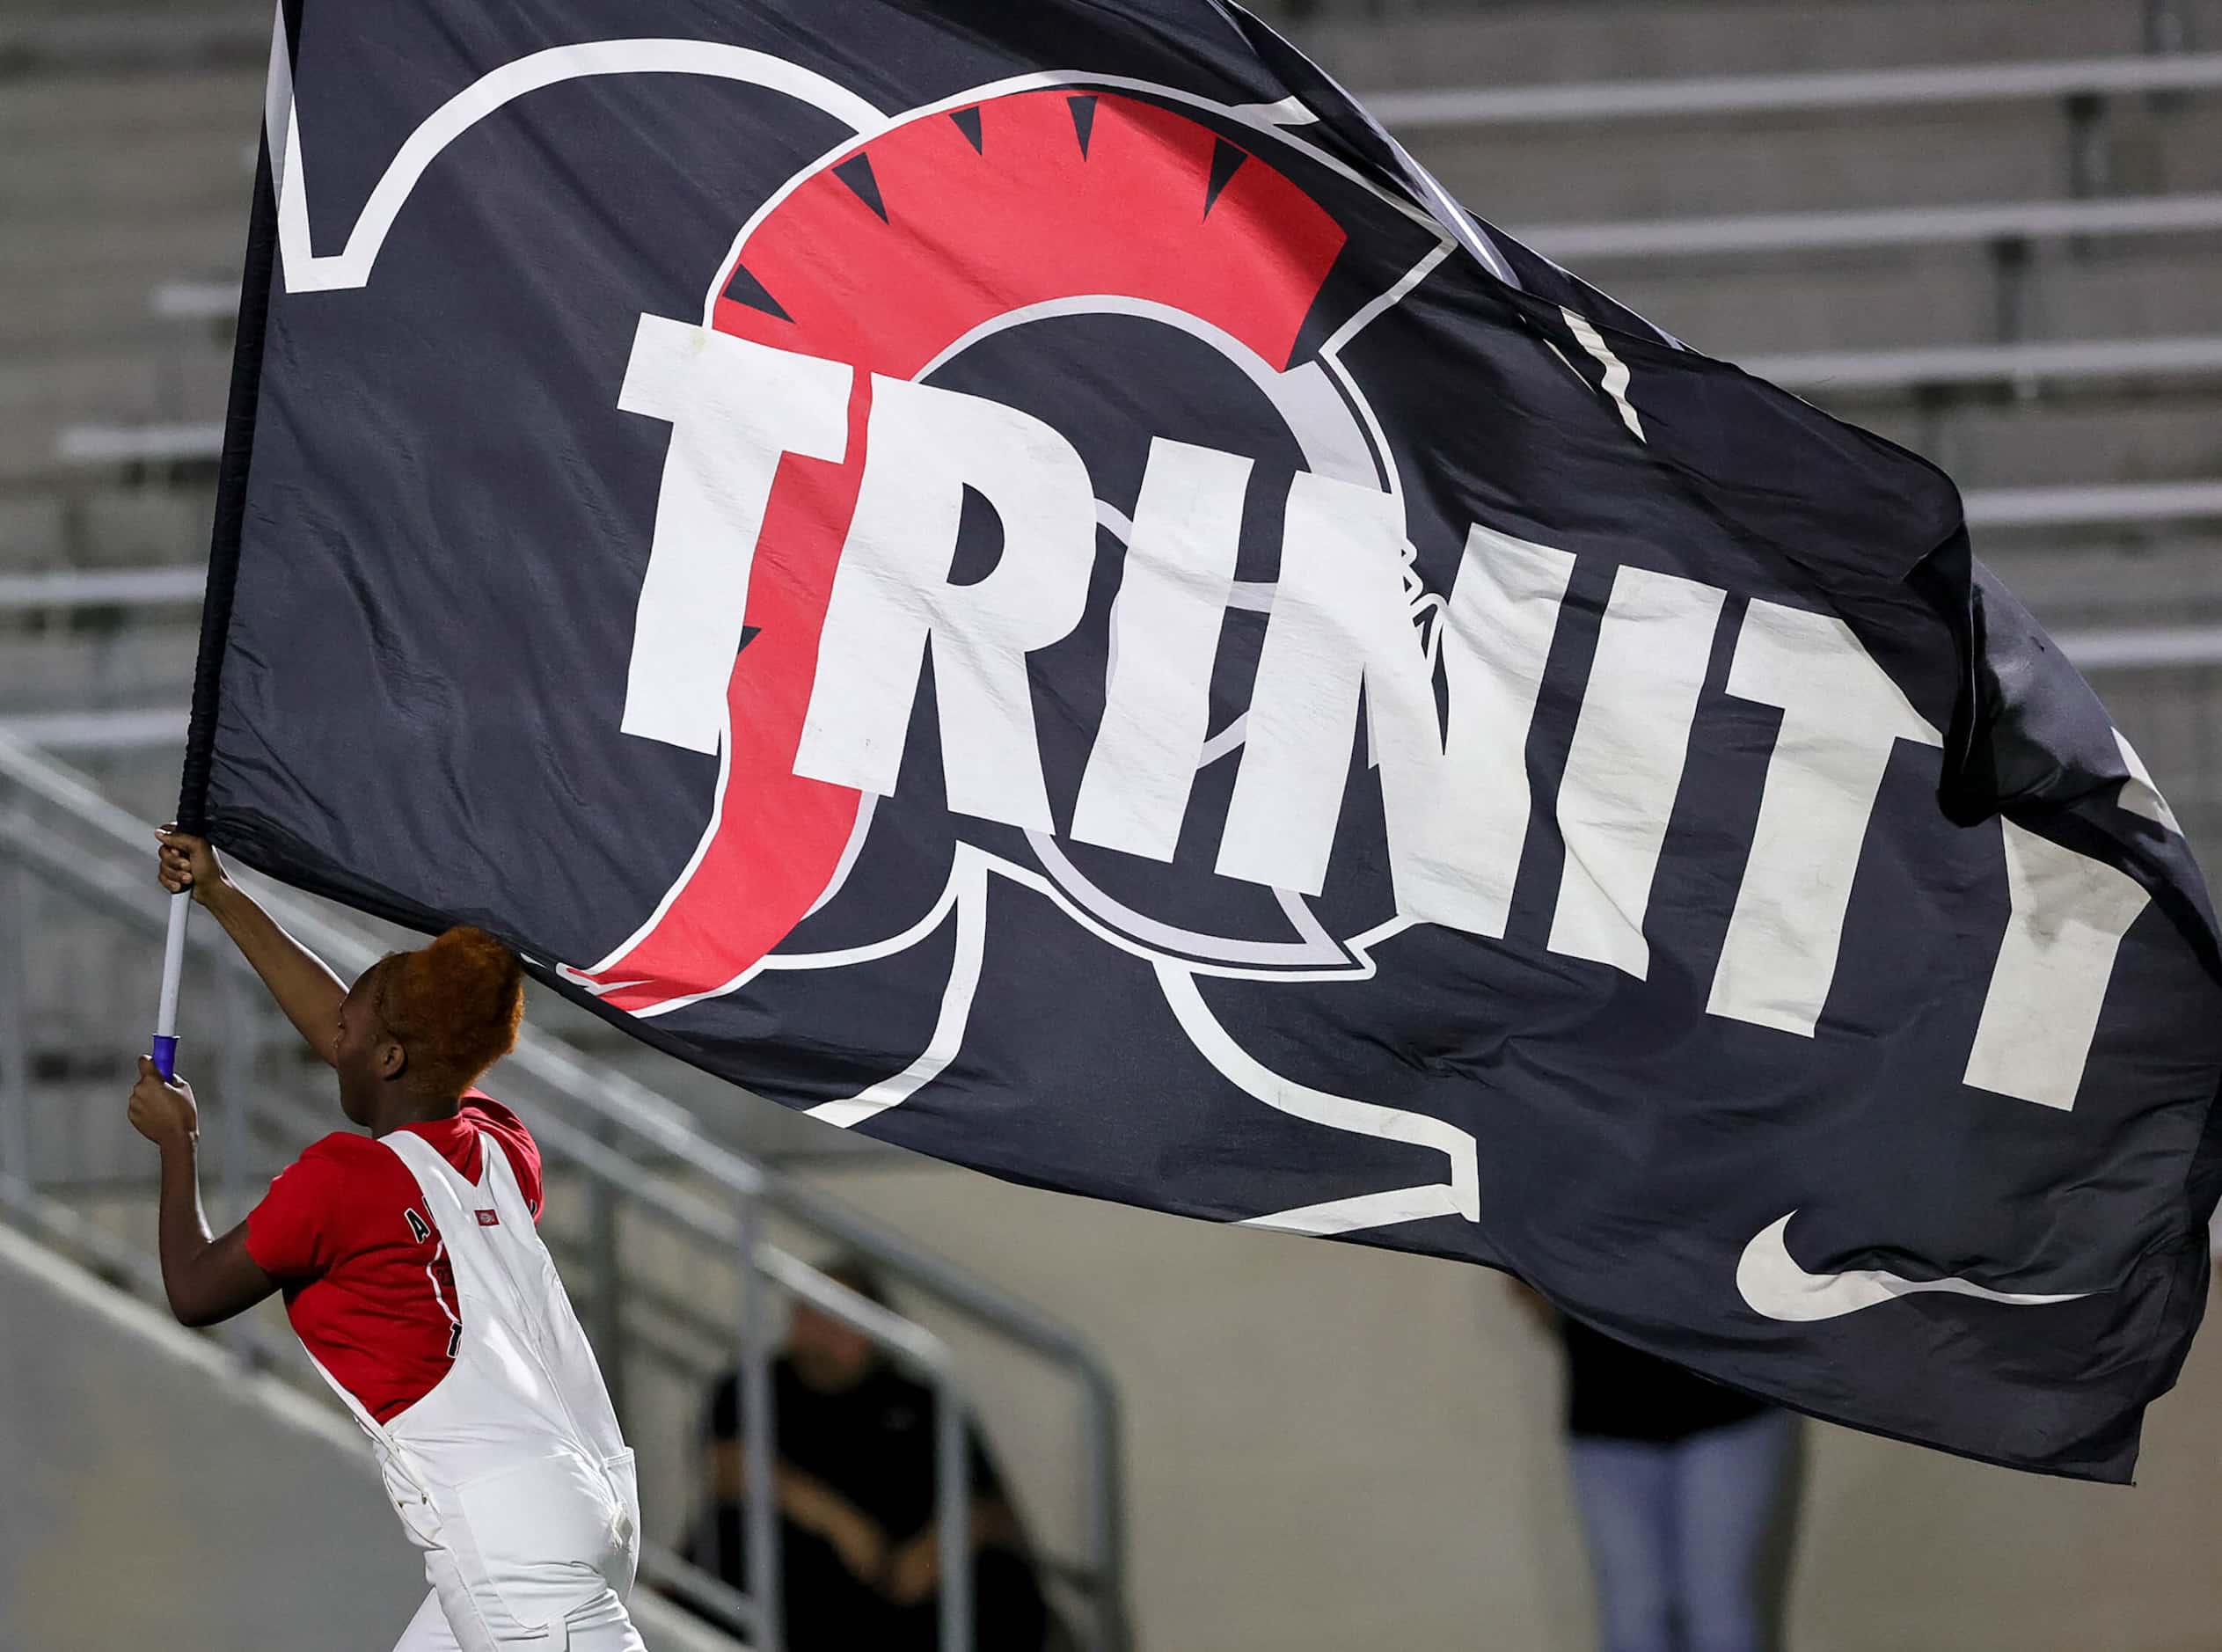 The Euless Trinity flag goes across the field after a touchdown against North Crowley during...